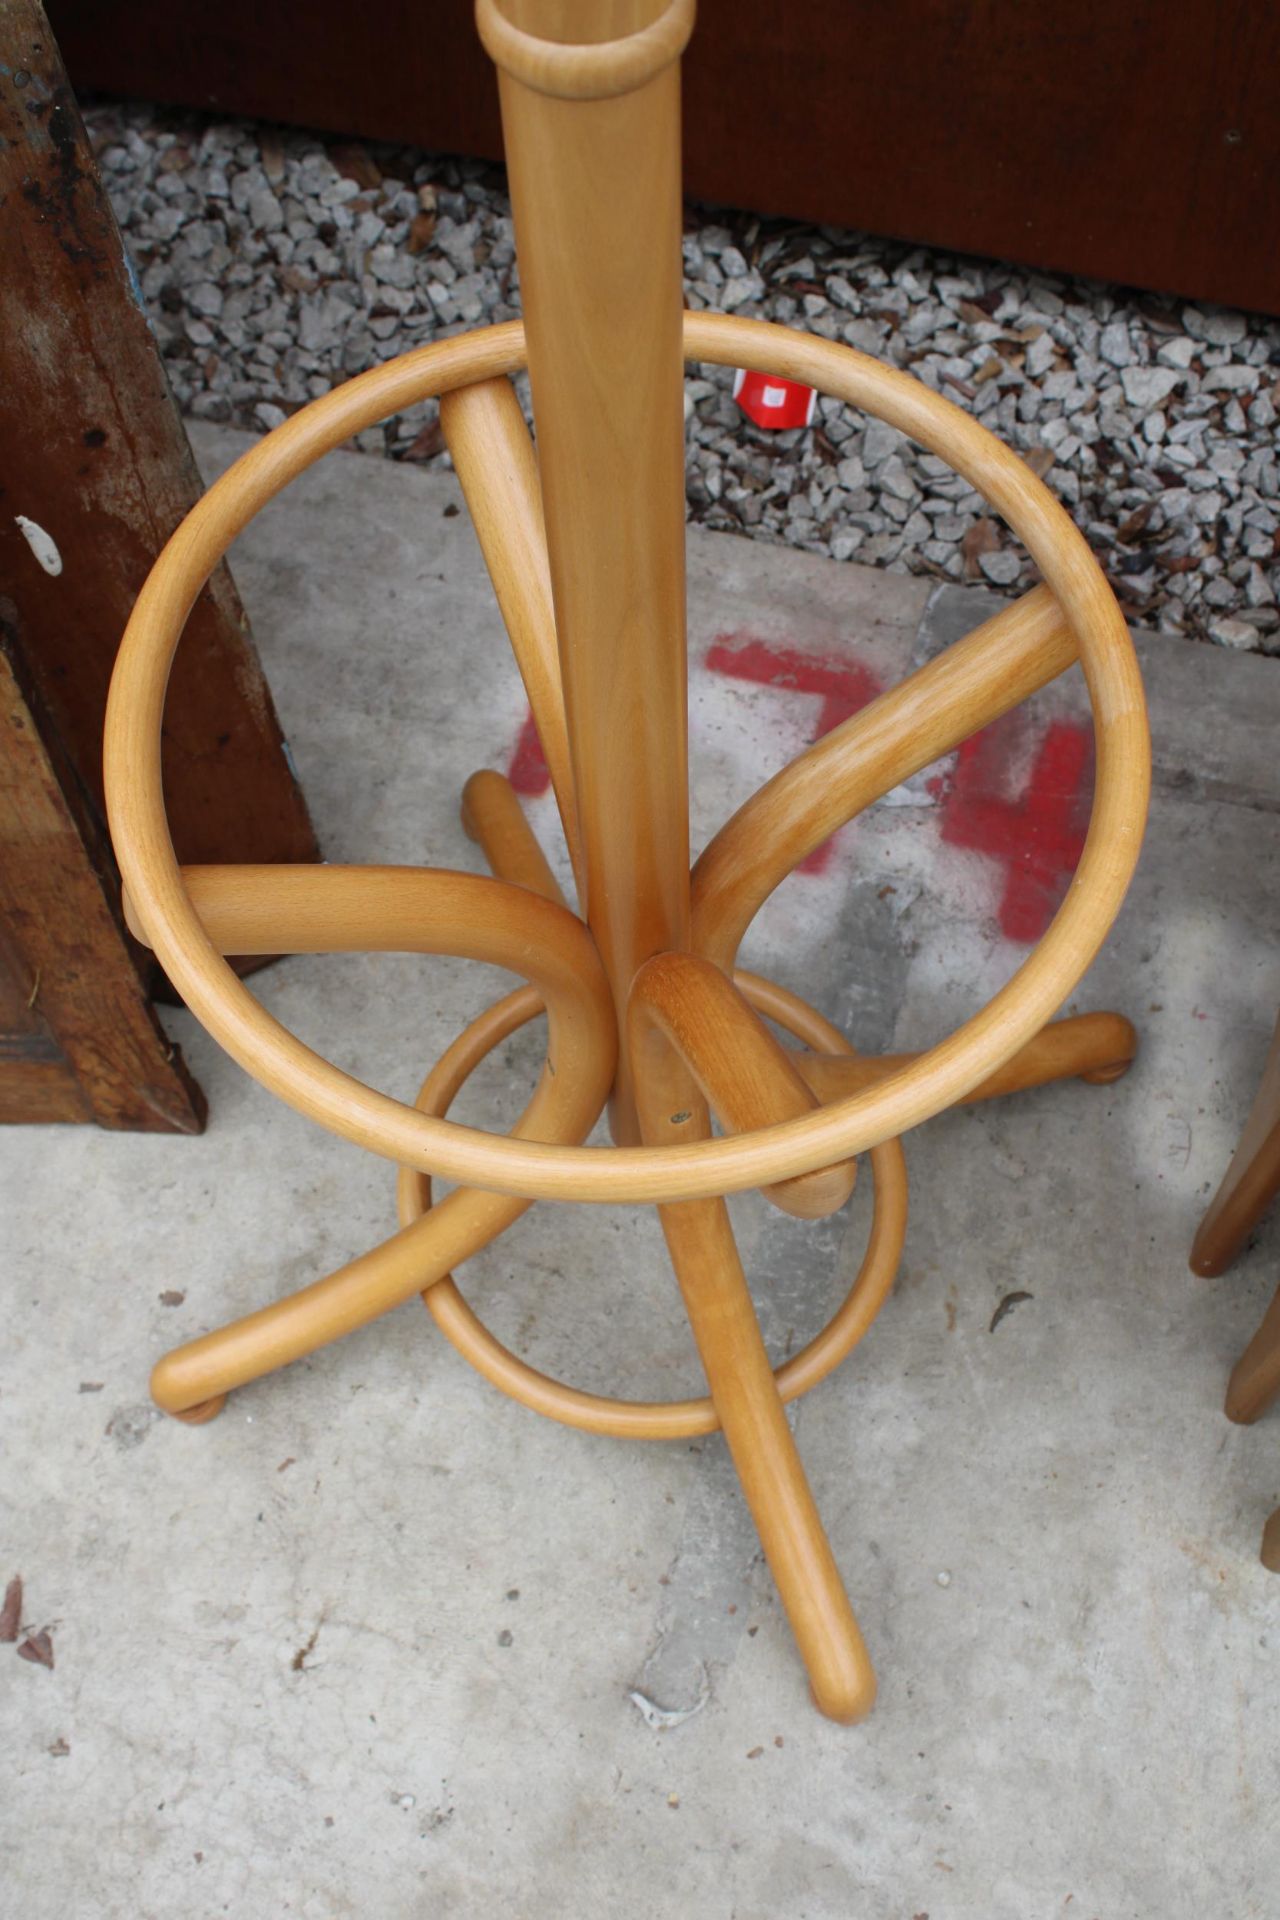 A BENTWOOD COAT/STICK STAND AND FIVE WOODEN HANGERS - Image 3 of 3